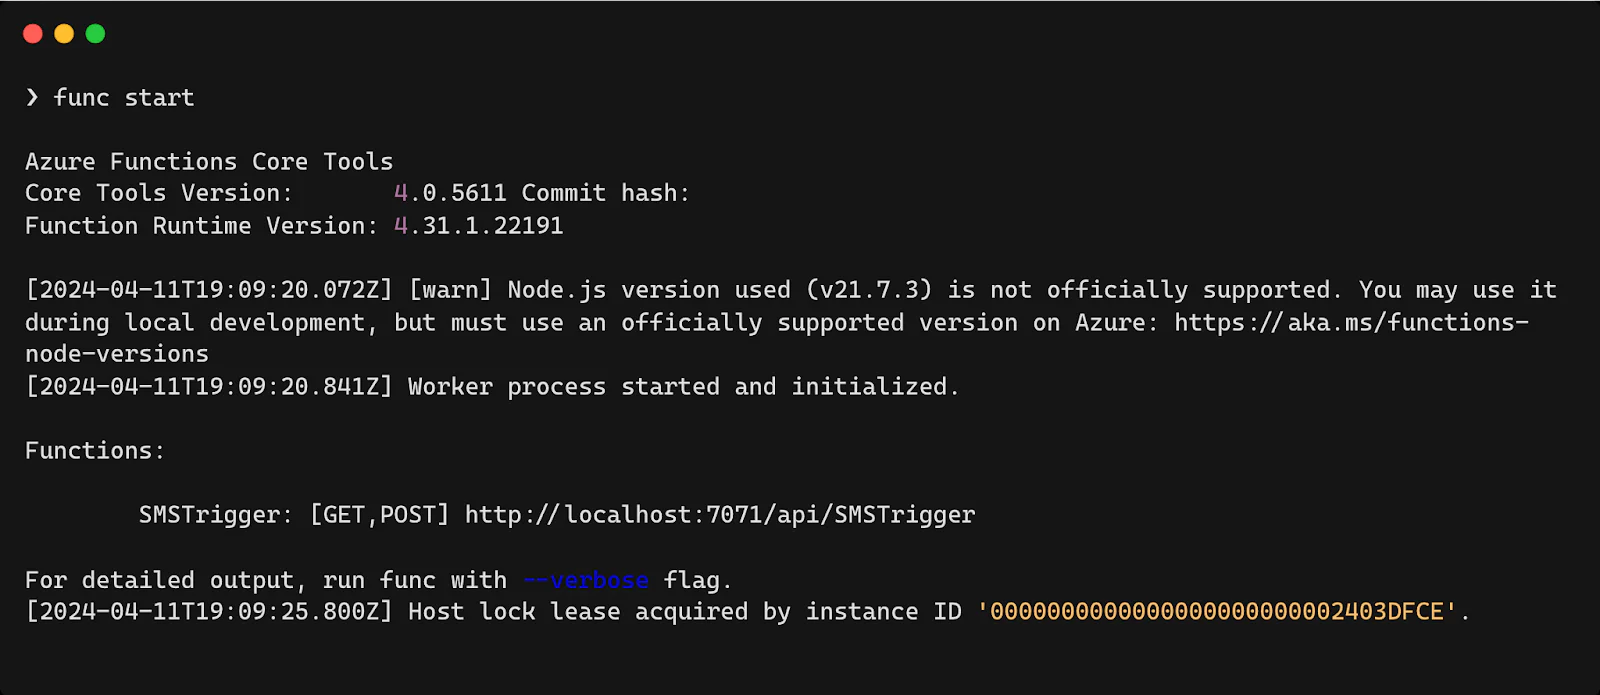 Azure Functions CLI command "func start" output